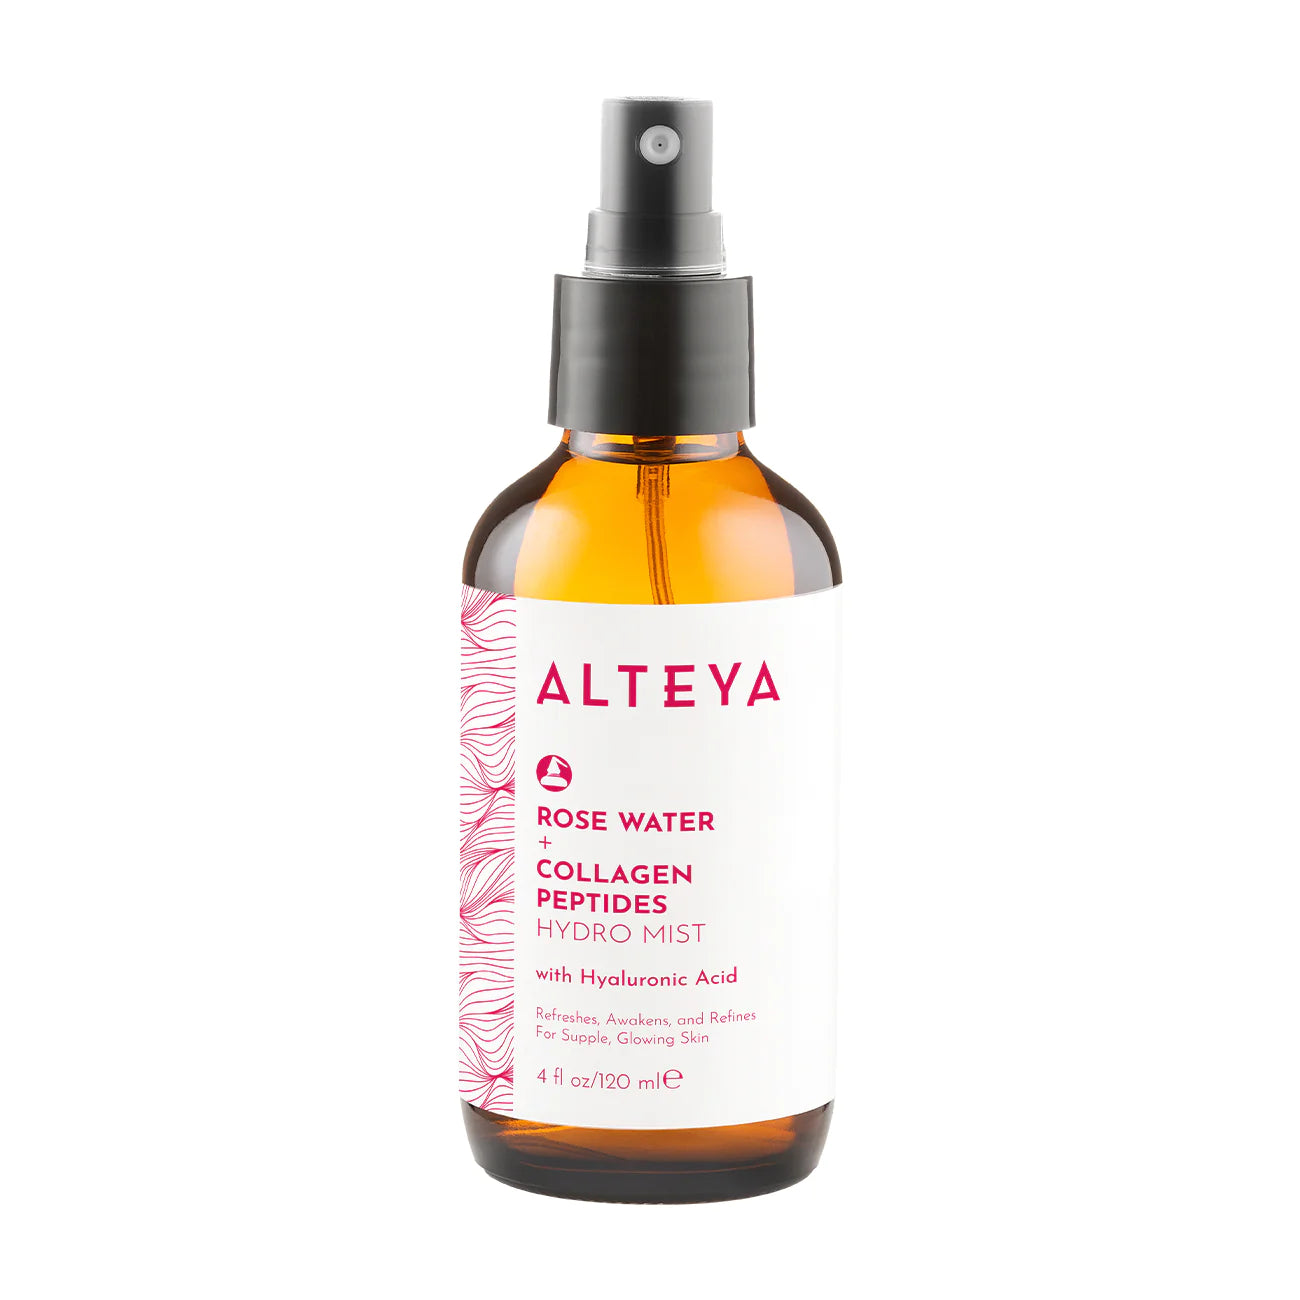 A bottle of the &quot;Rose Water Face Toner with Collagen Peptides and Hyaluronic Acid&quot; for skin rejuvenation on a white background.